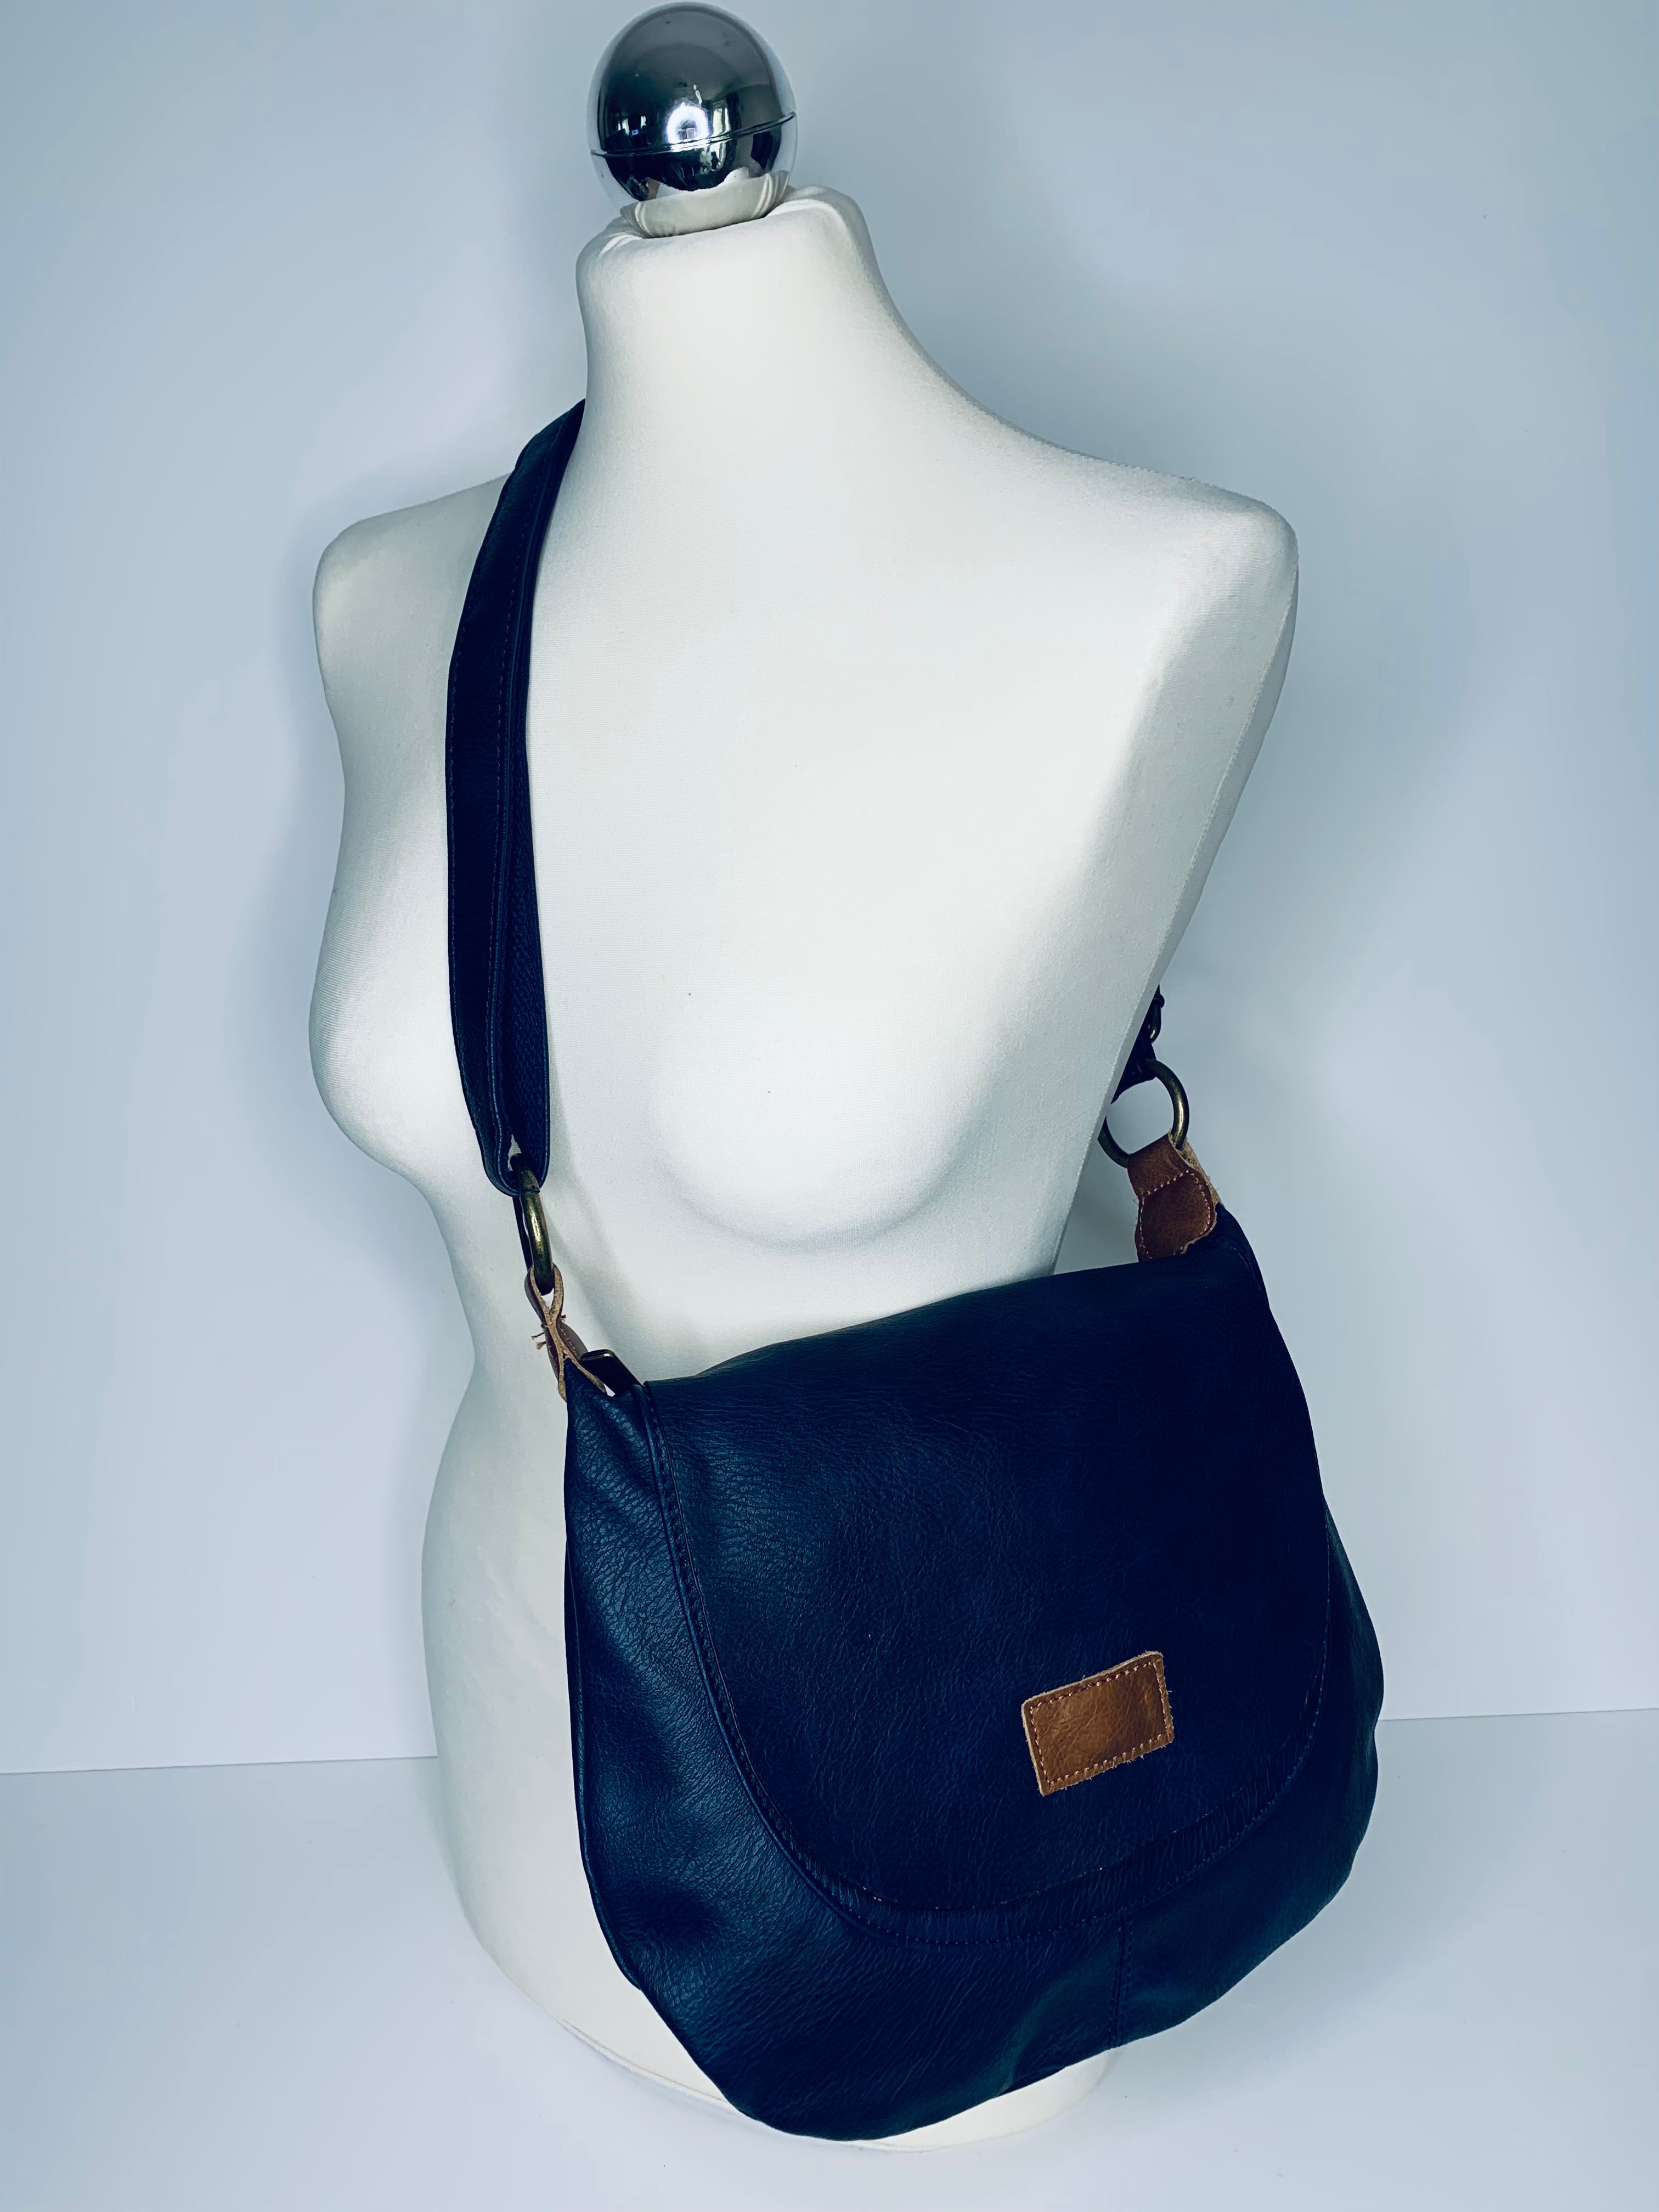 Vegan leather, cross-body round satchel bag with top zip, magnetic dot closure and adjustable strap in navy blue